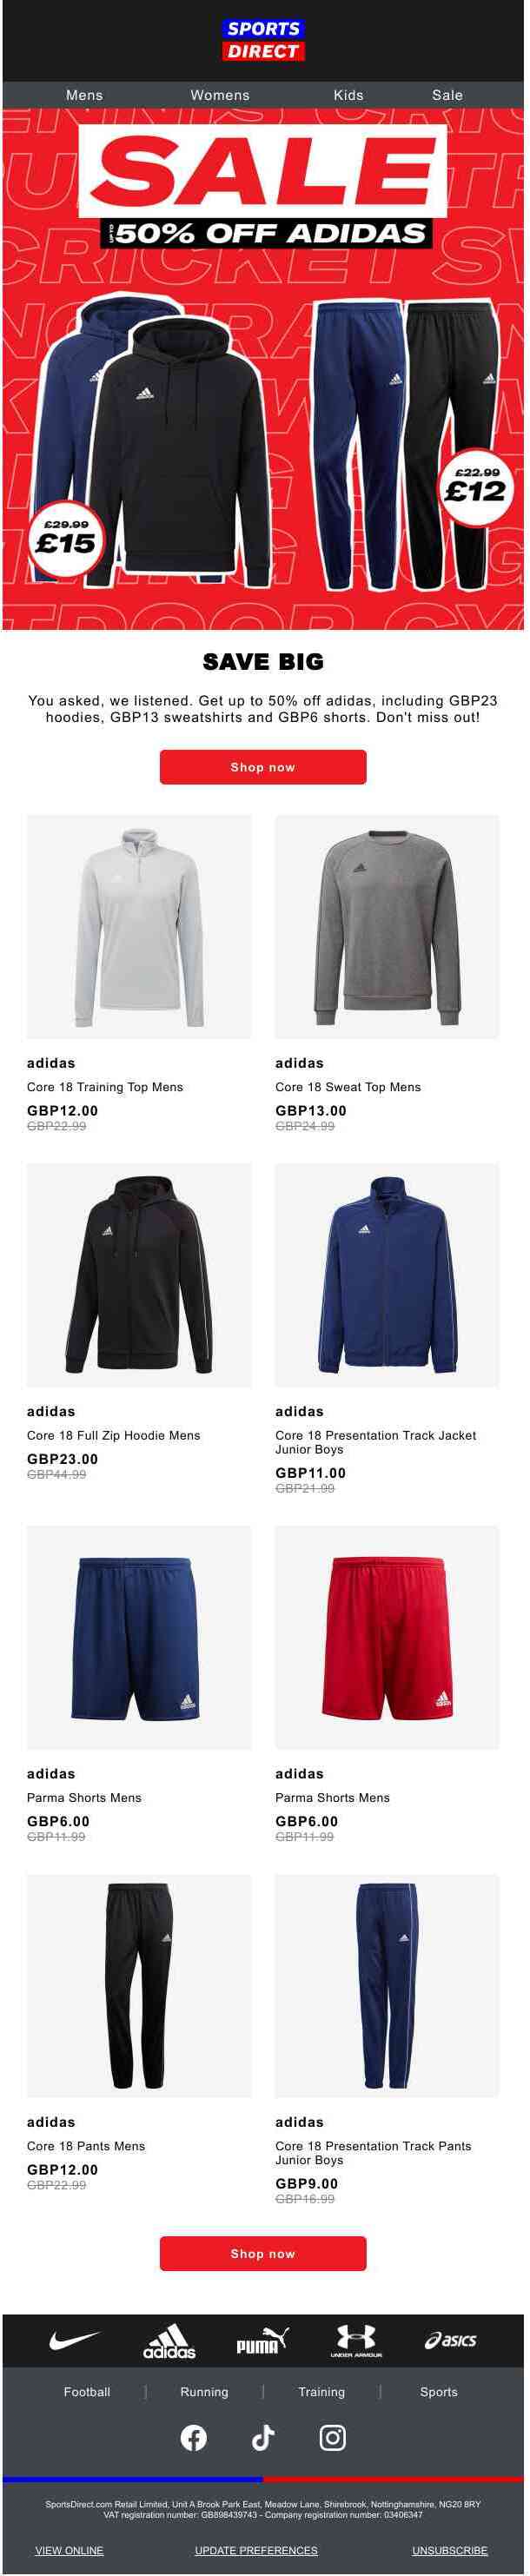 adidas Sale 👏 Up to 50% off 👏